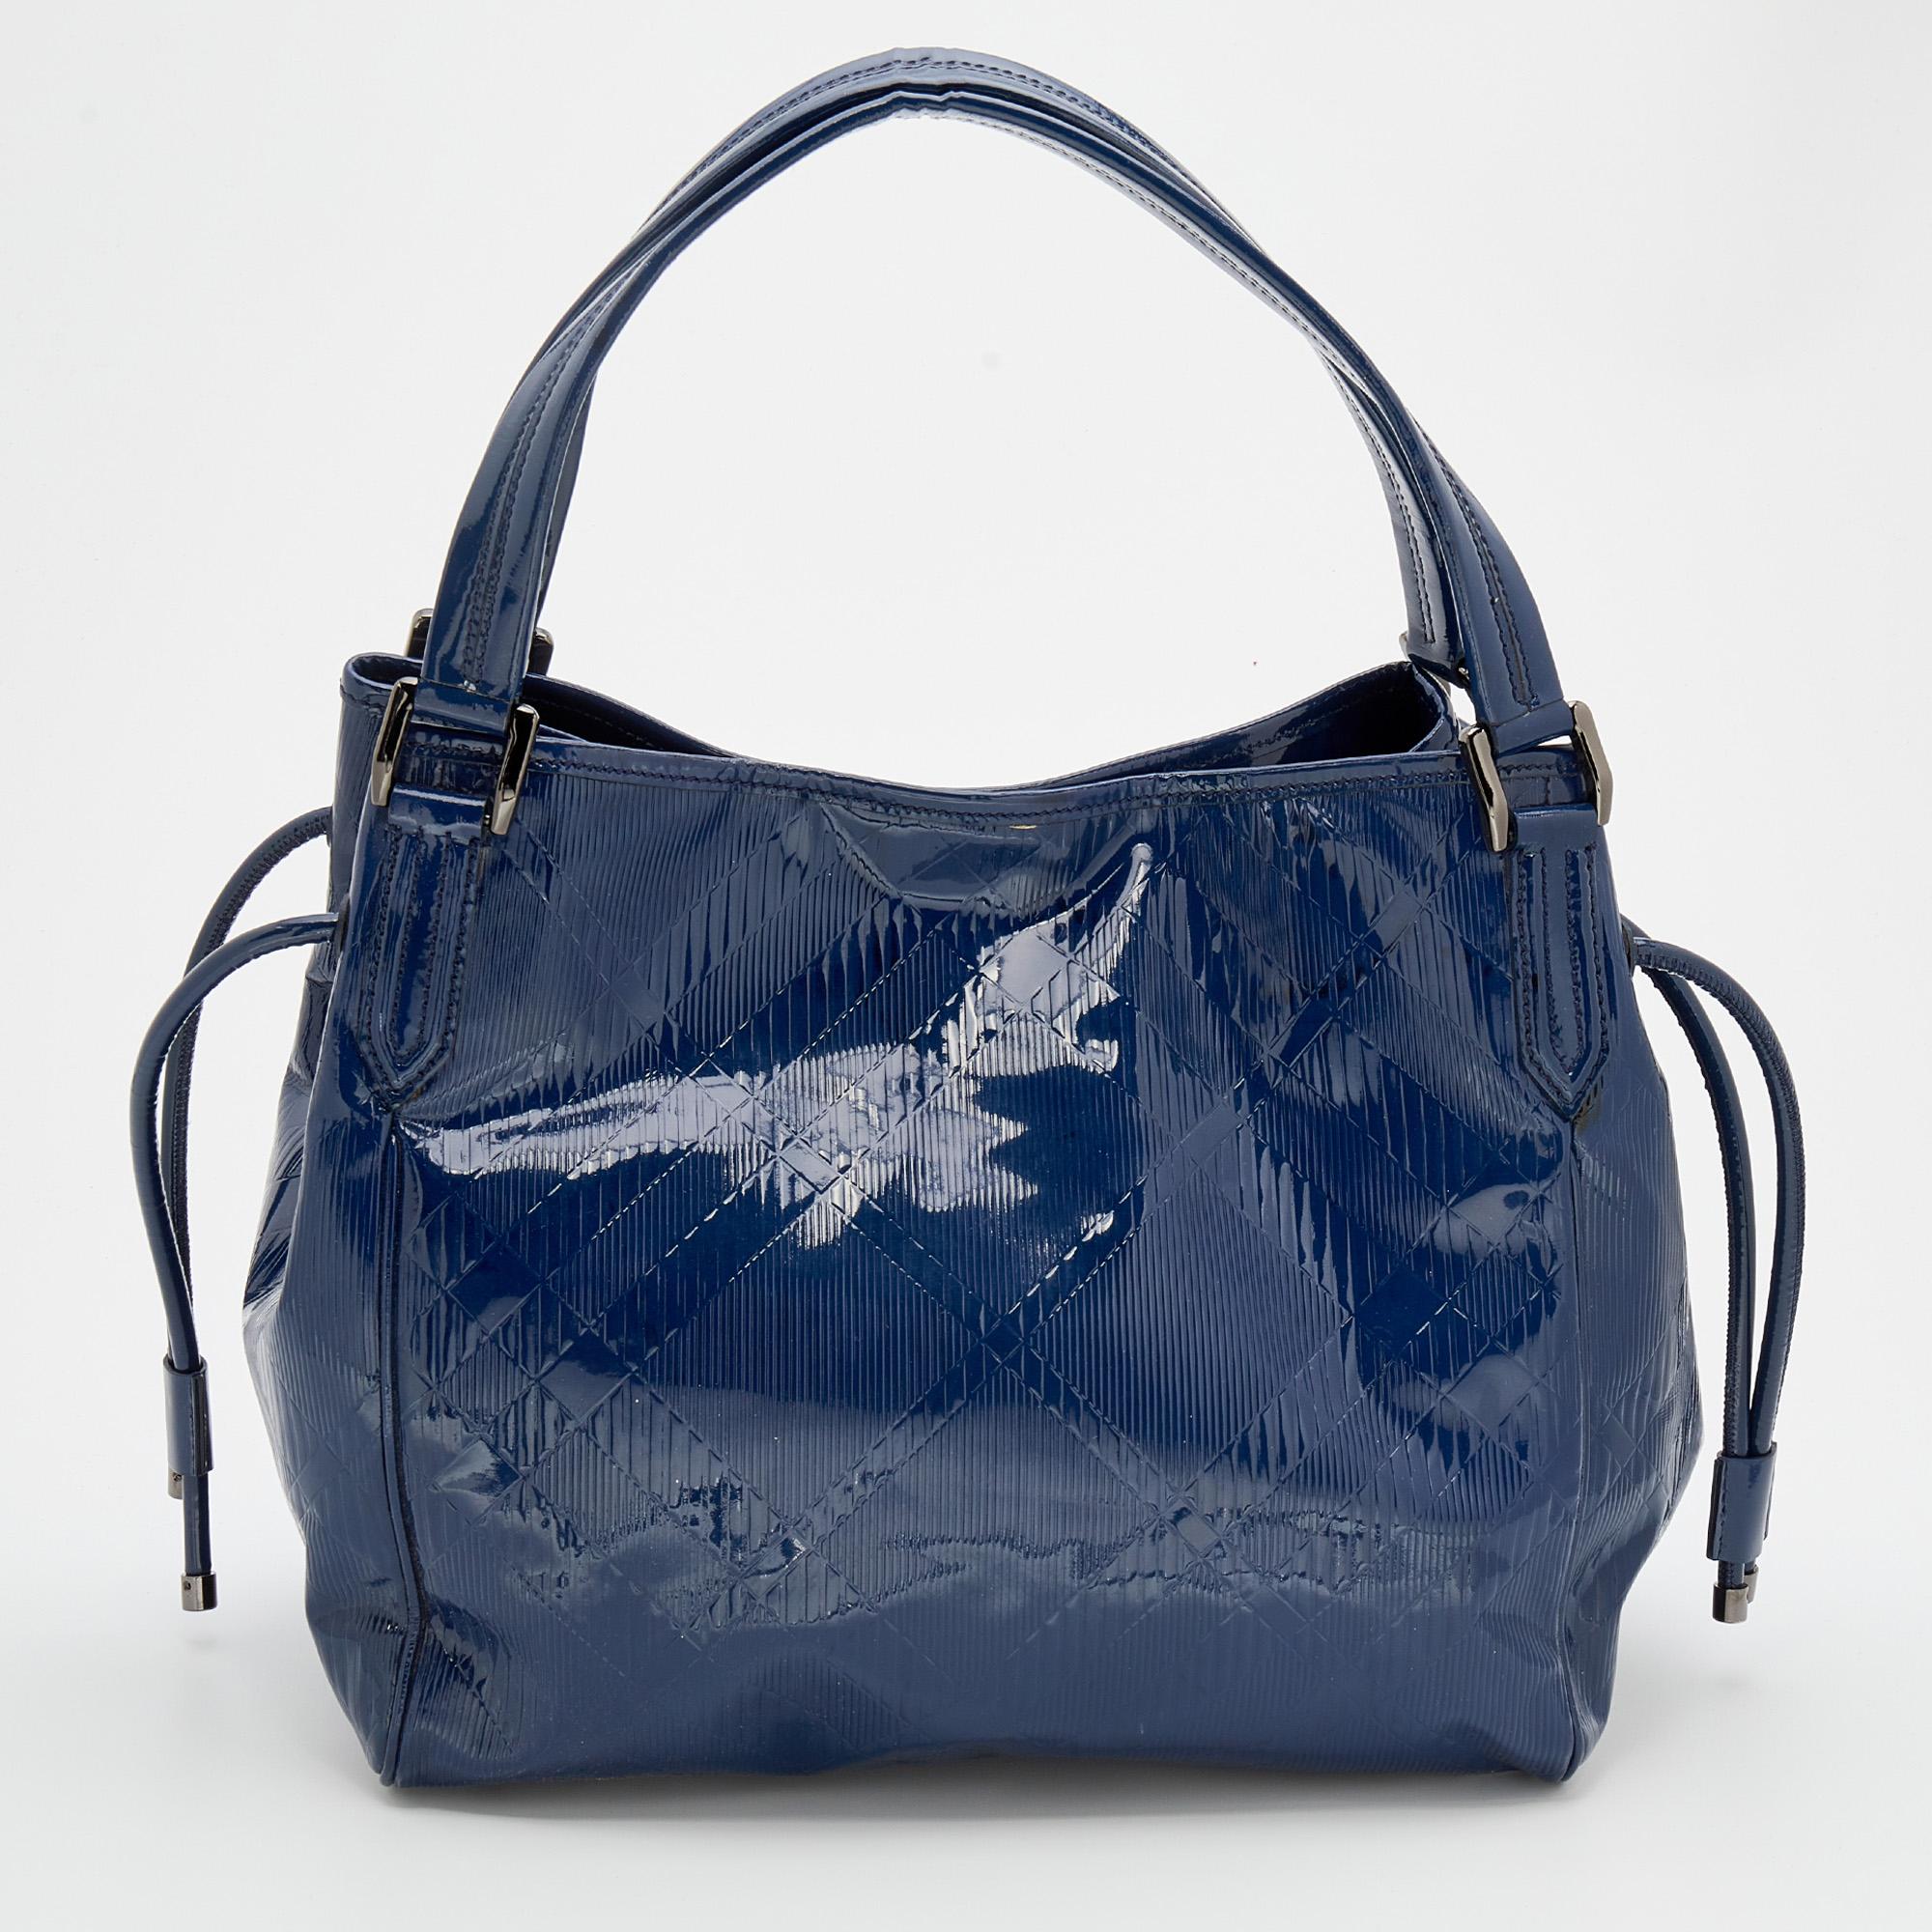 This Burberry tote promises to take you through the day with ease, whether you're at work or out and about in the city. From its look to its finish, the leather bag promises charm and durability. It has top handles and a spacious fabric interior to